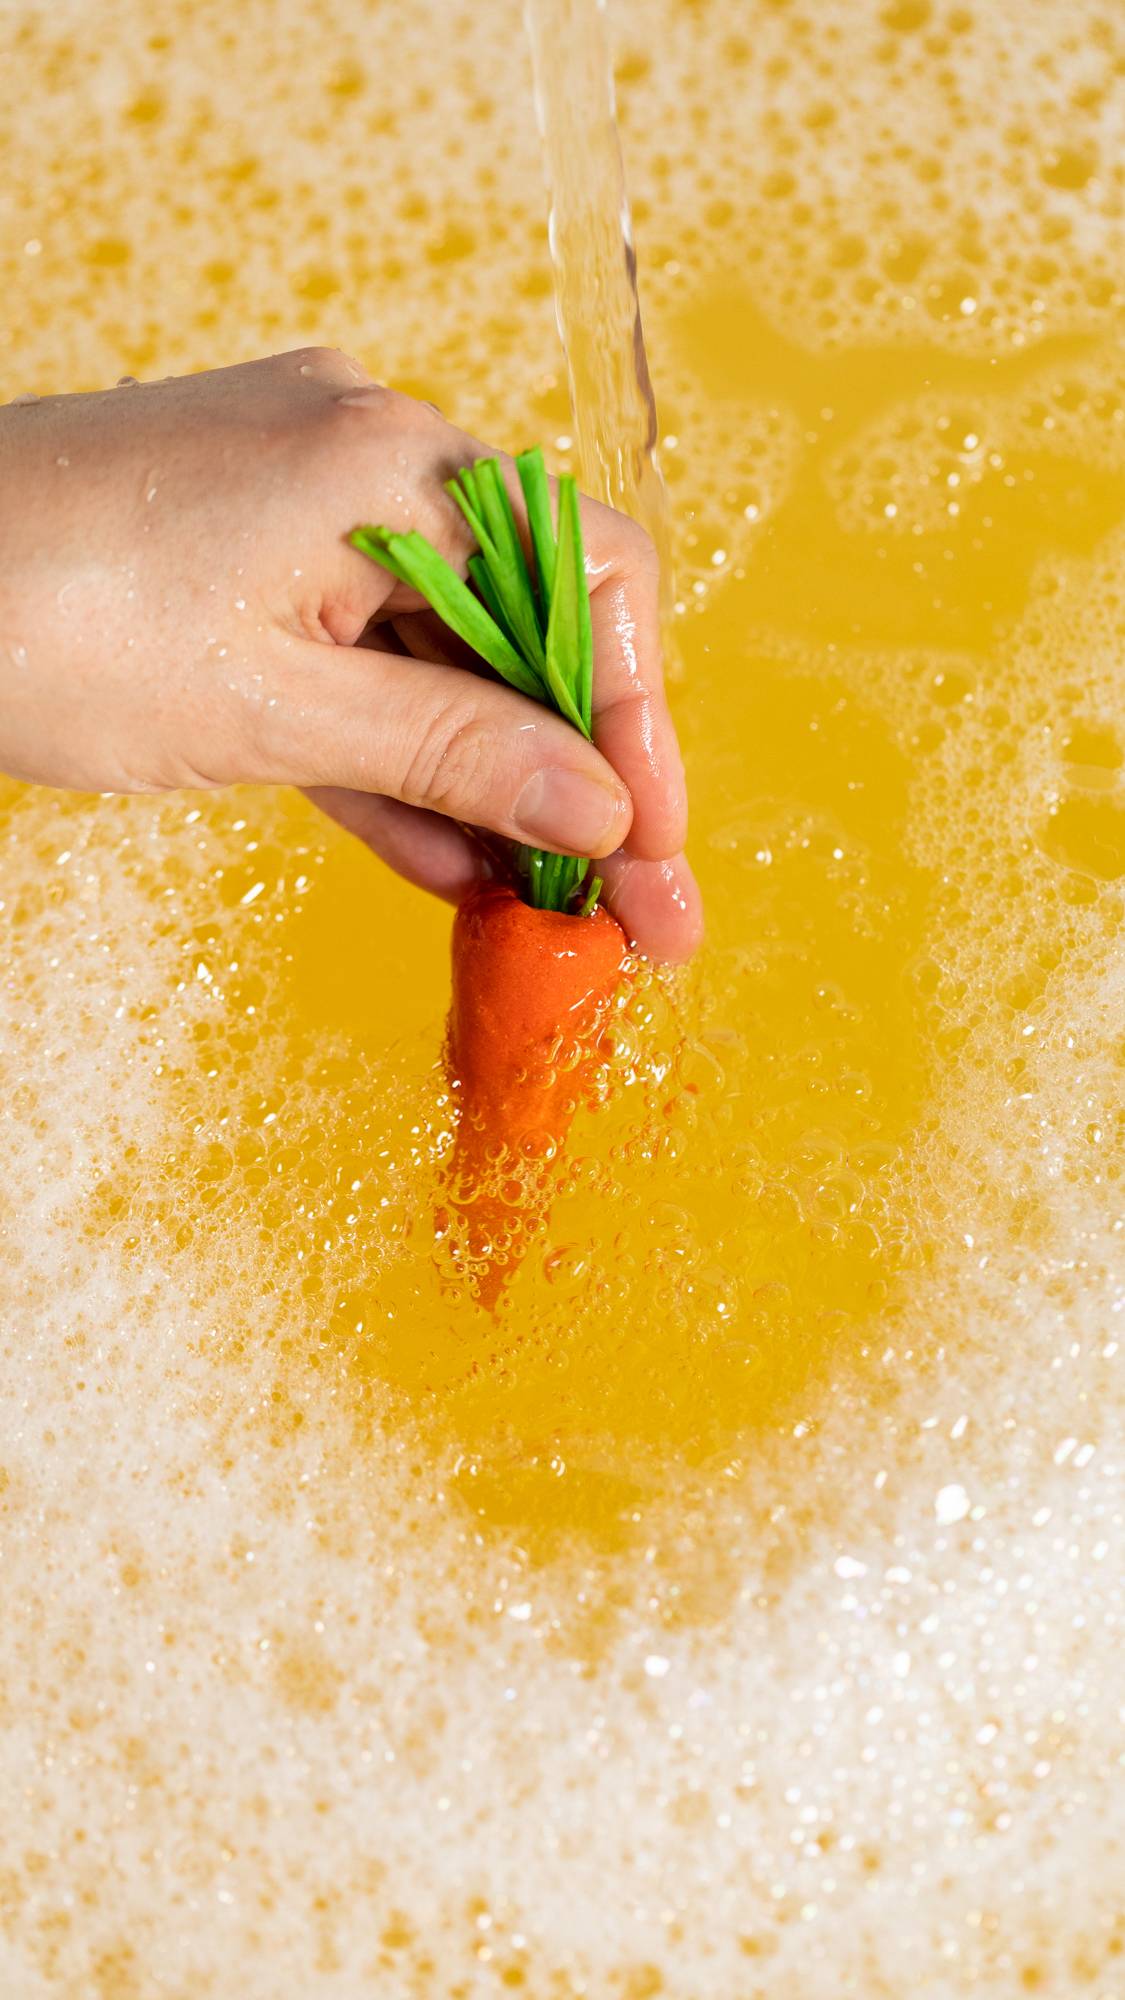 A close-up image of the model's hand dipping the orange carrot bubble bar into the bath under running water creating light, orange bubbles.